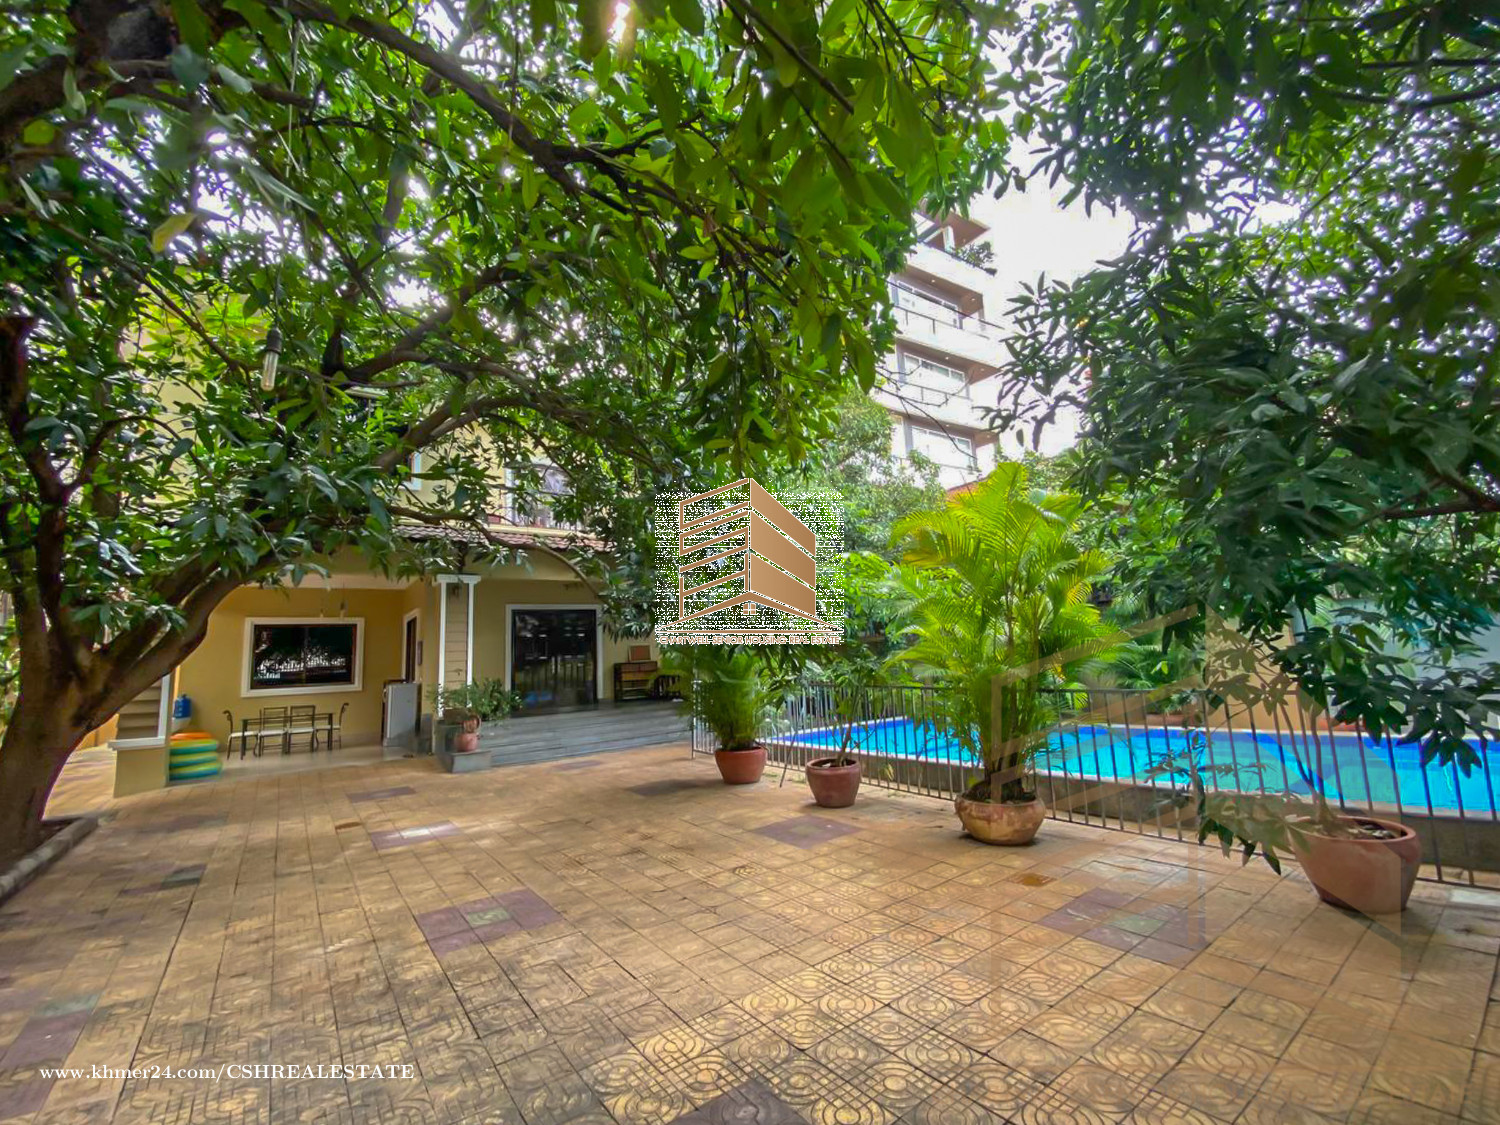 4 Bedrooms Villa with swimming pool available for rent in Toul Kork Area